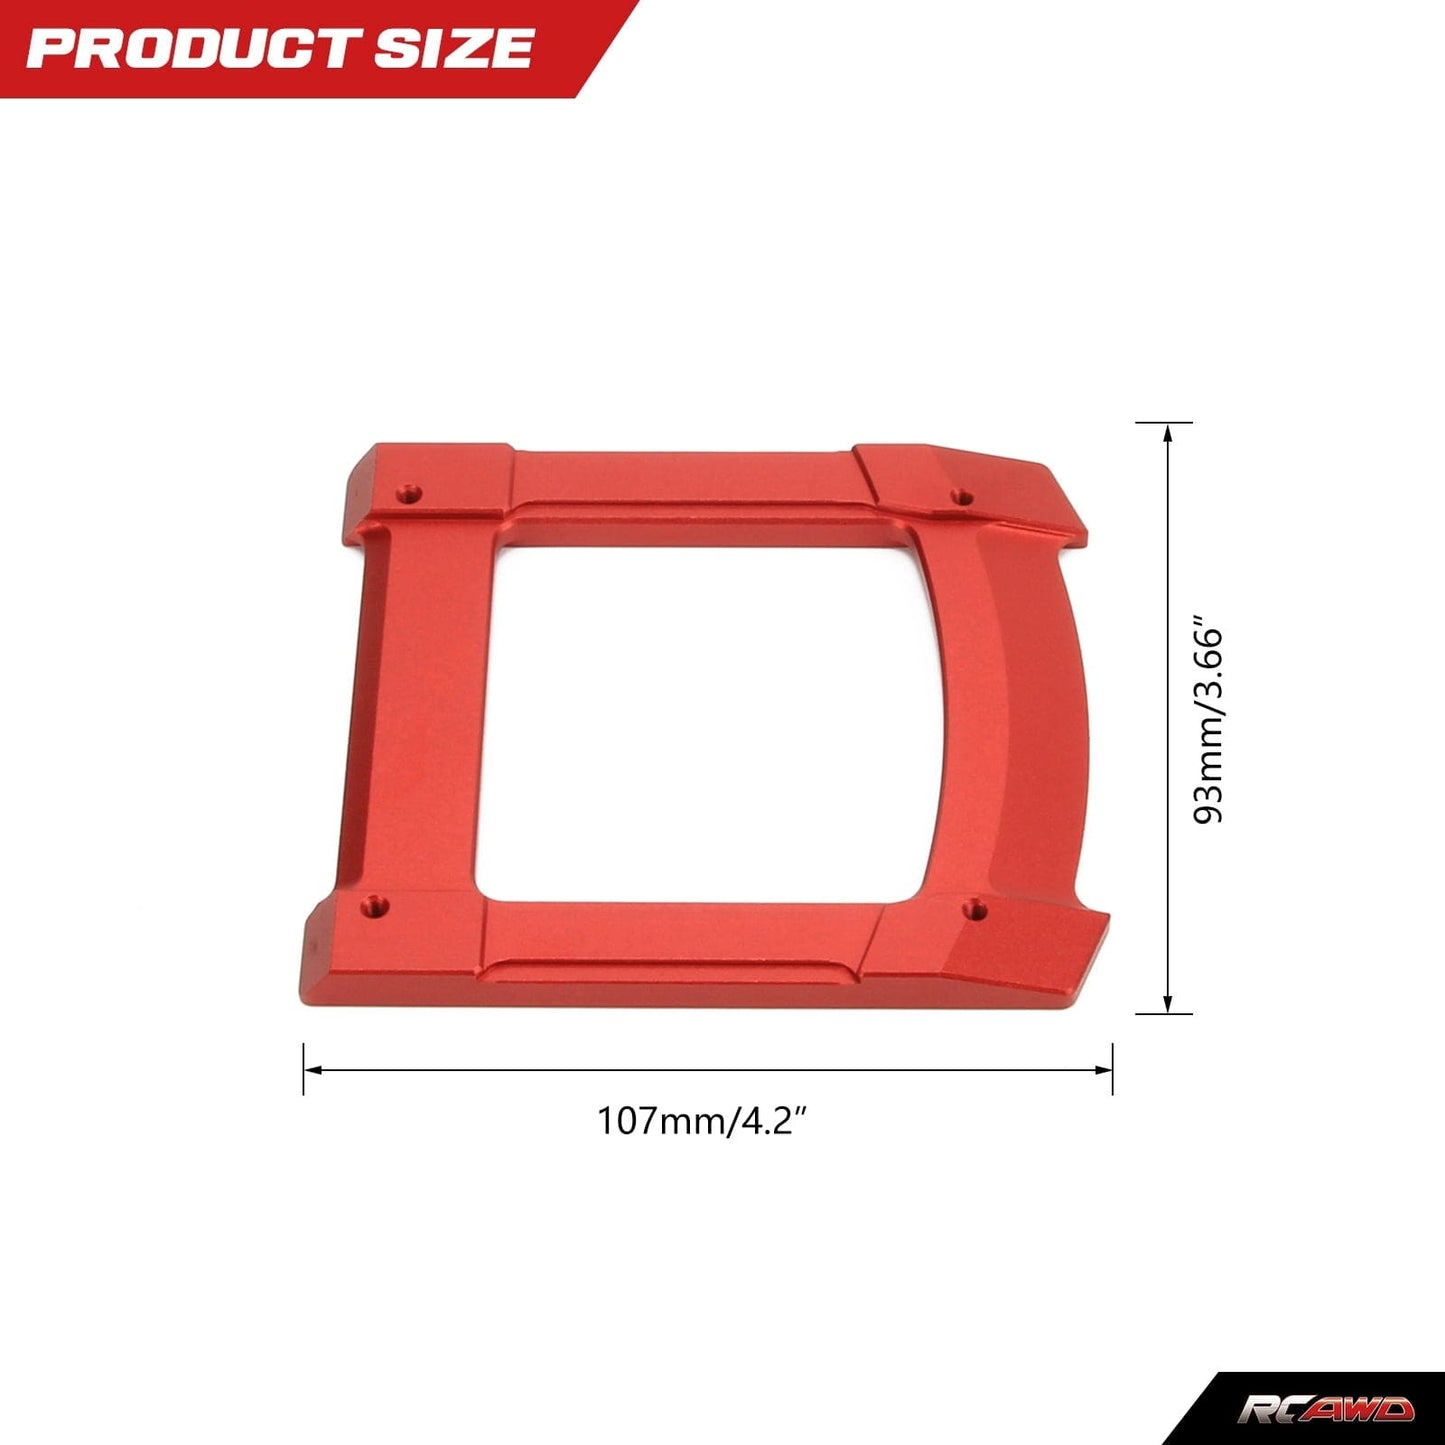 RCAWD ARRMA 3S RCAWD Traxxas Alloy Skid Plate for Maxx Upgrades